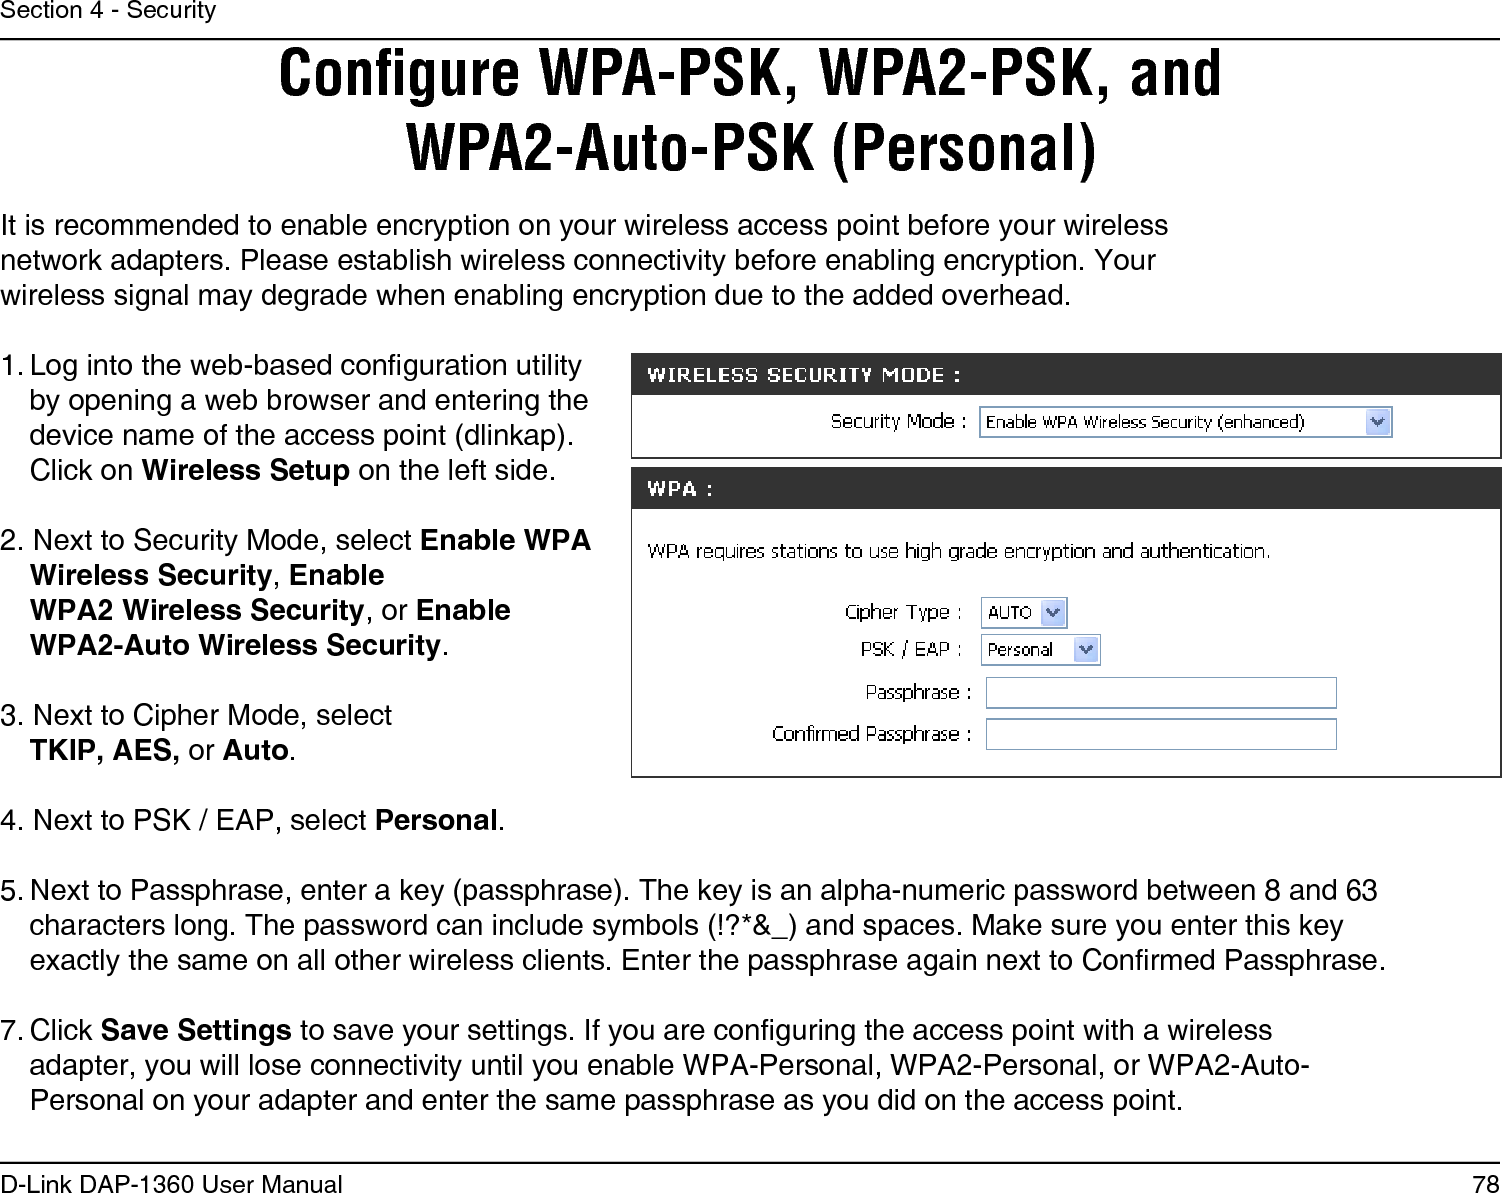 78D-Link DAP-1360 User ManualSection 4 - SecurityConﬁgure WPA-PSK, WPA2-PSK, and WPA2-Auto-PSK (Personal)It is recommended to enable encryption on your wireless access point before your wireless network adapters. Please establish wireless connectivity before enabling encryption. Your wireless signal may degrade when enabling encryption due to the added overhead.1. Log into the web-based conguration utility by opening a web browser and entering the device name of the access point (dlinkap).  Click on Wireless Setup on the left side.2. Next to Security Mode, select Enable WPA Wireless Security, Enable  WPA2 Wireless Security, or Enable  WPA2-Auto Wireless Security.3. Next to Cipher Mode, select TKIP, AES, or Auto.4. Next to PSK / EAP, select Personal.5. Next to Passphrase, enter a key (passphrase). The key is an alpha-numeric password between 8 and 63 characters long. The password can include symbols (!?*&amp;_) and spaces. Make sure you enter this key exactly the same on all other wireless clients. Enter the passphrase again next to Conrmed Passphrase.7. Click Save Settings to save your settings. If you are conguring the access point with a wireless adapter, you will lose connectivity until you enable WPA-Personal, WPA2-Personal, or WPA2-Auto-Personal on your adapter and enter the same passphrase as you did on the access point.